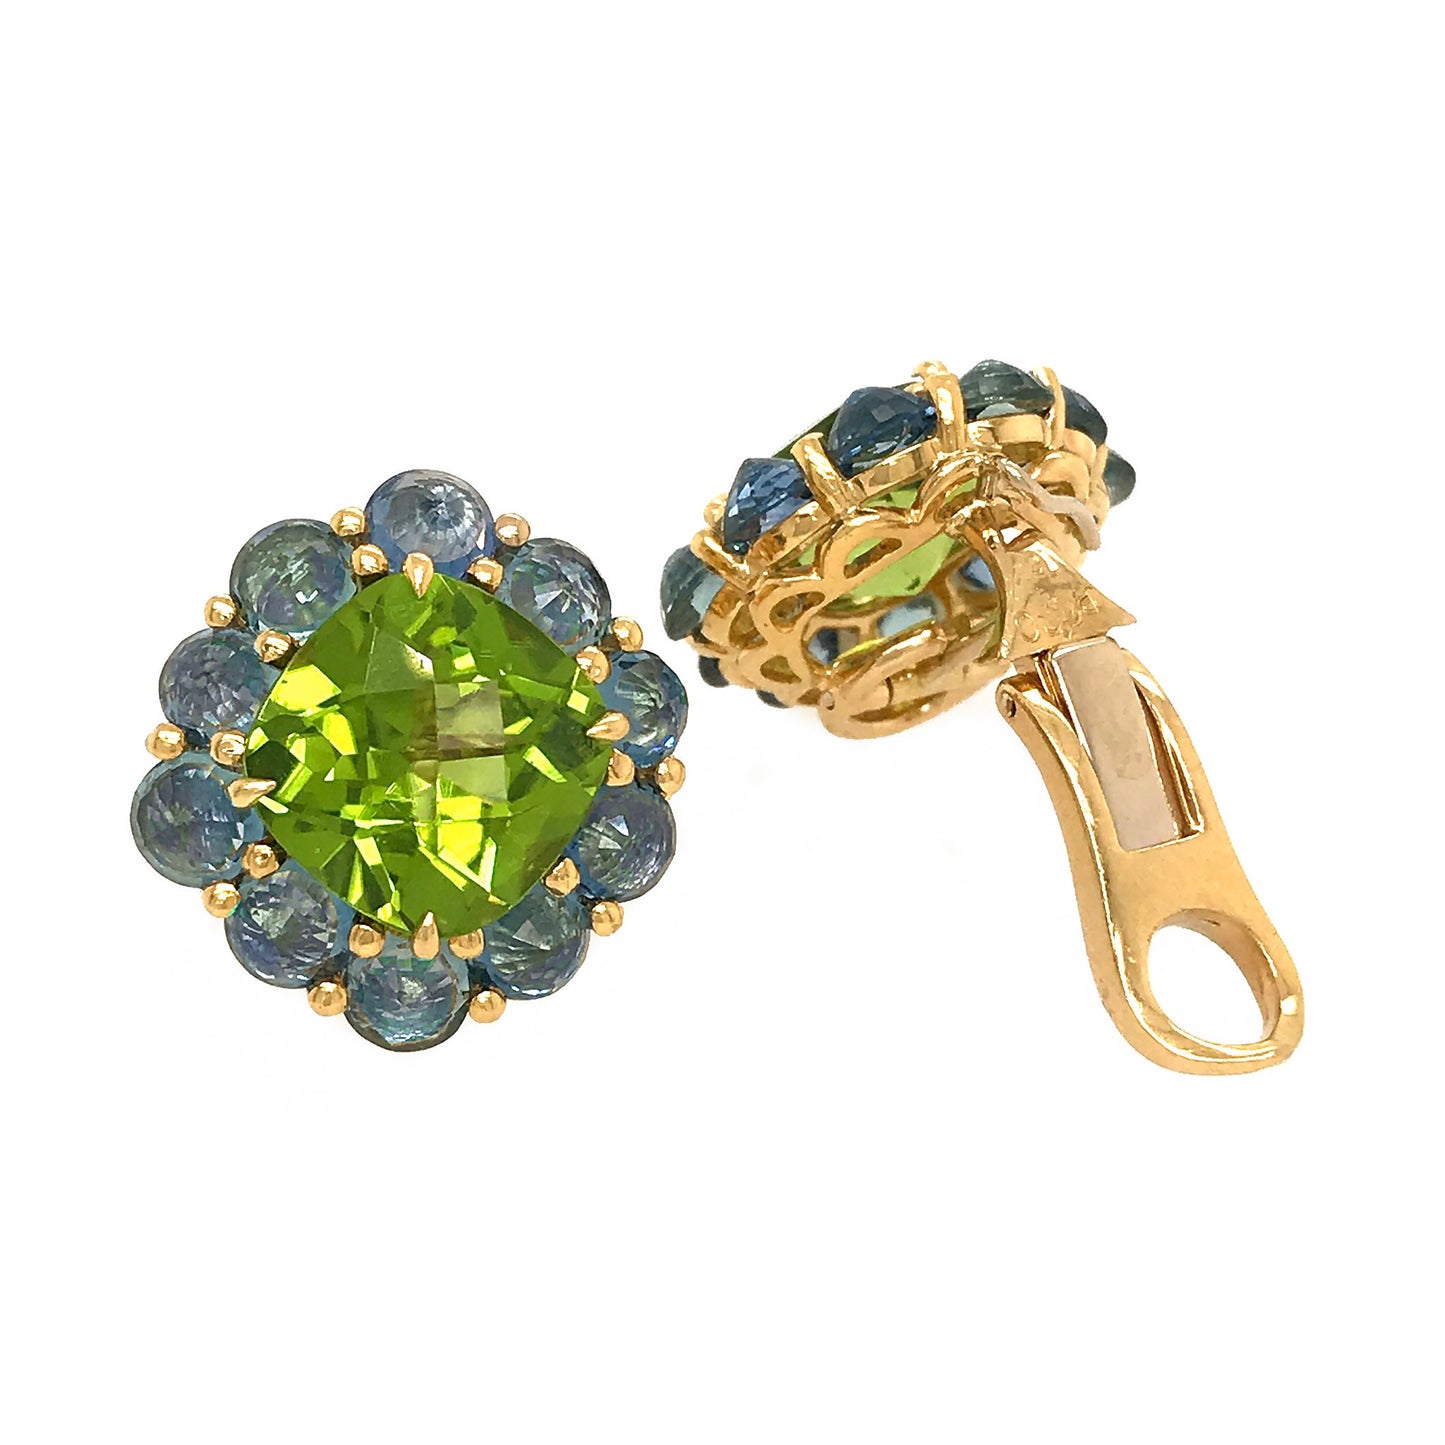 Pre-Owned Paolo Costagli 18k Yellow Gold Peridot and Sapphire Earrings